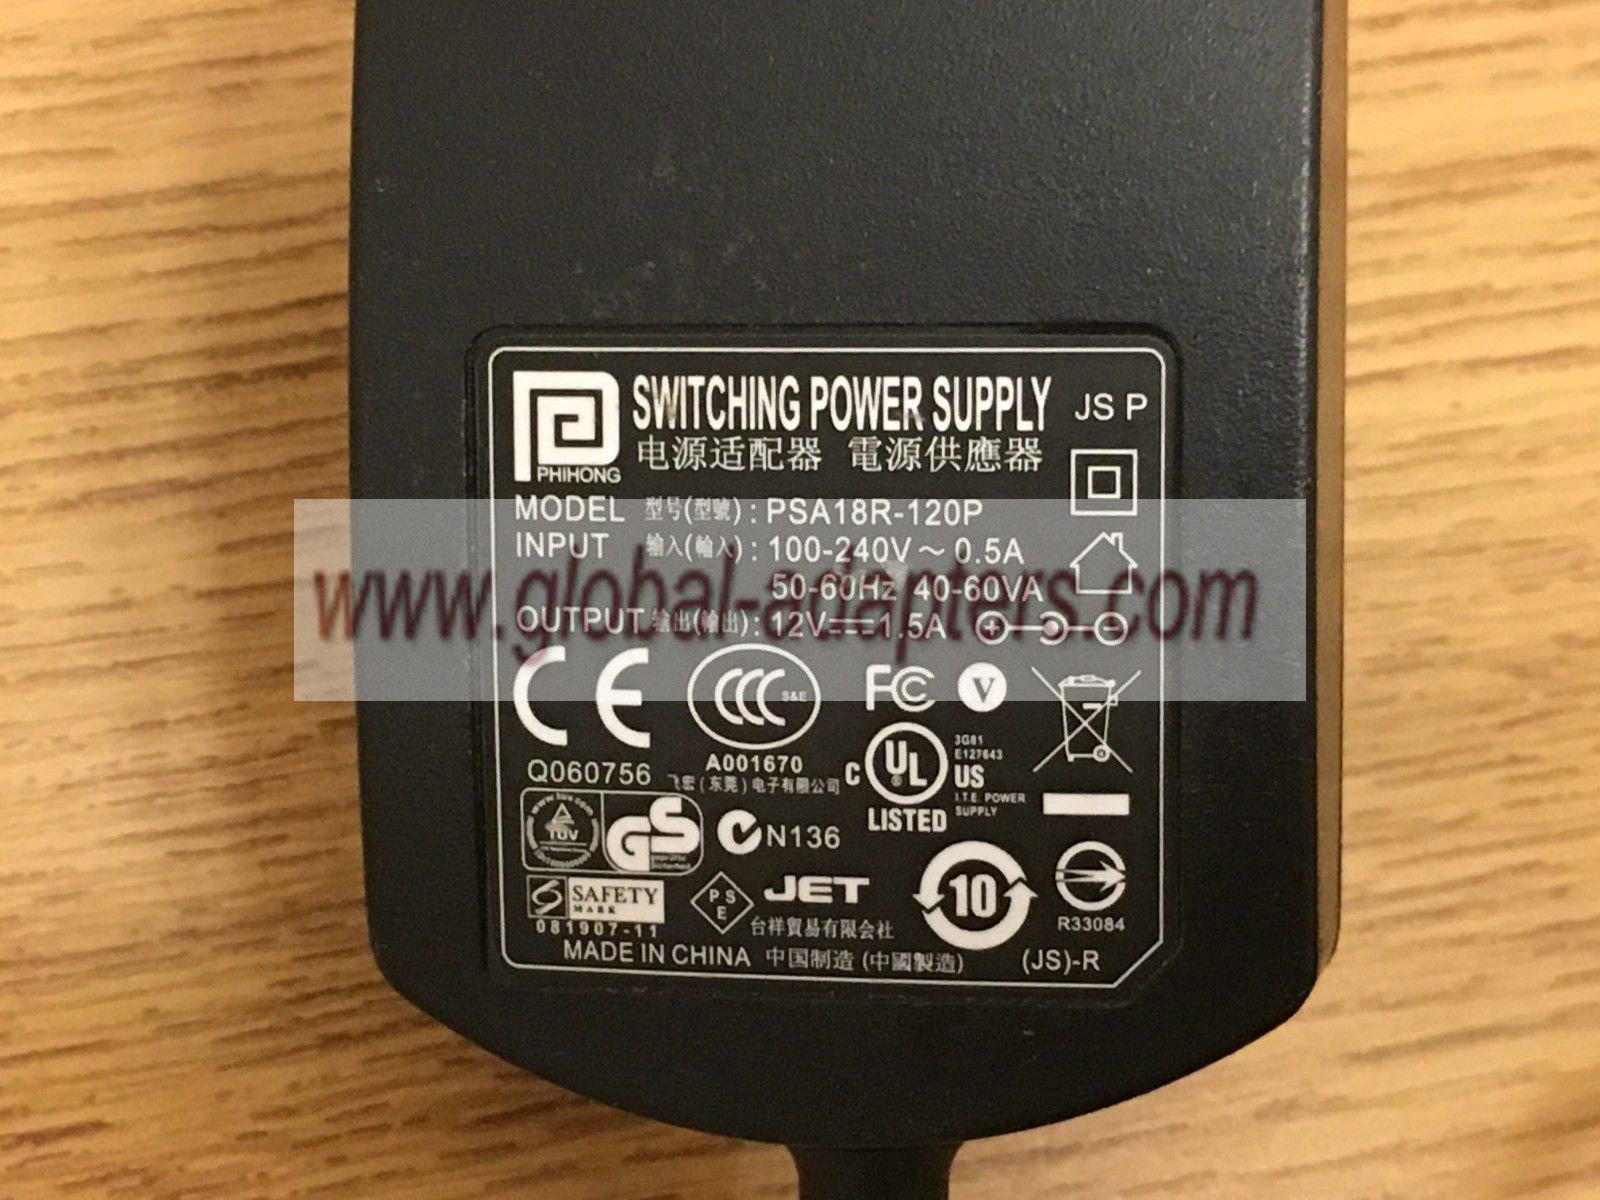 GENUINE 12V 1.5A PHIHONG PSA18R-120P AC/DC SWITCHING POWER SUPPLY ADAPTER